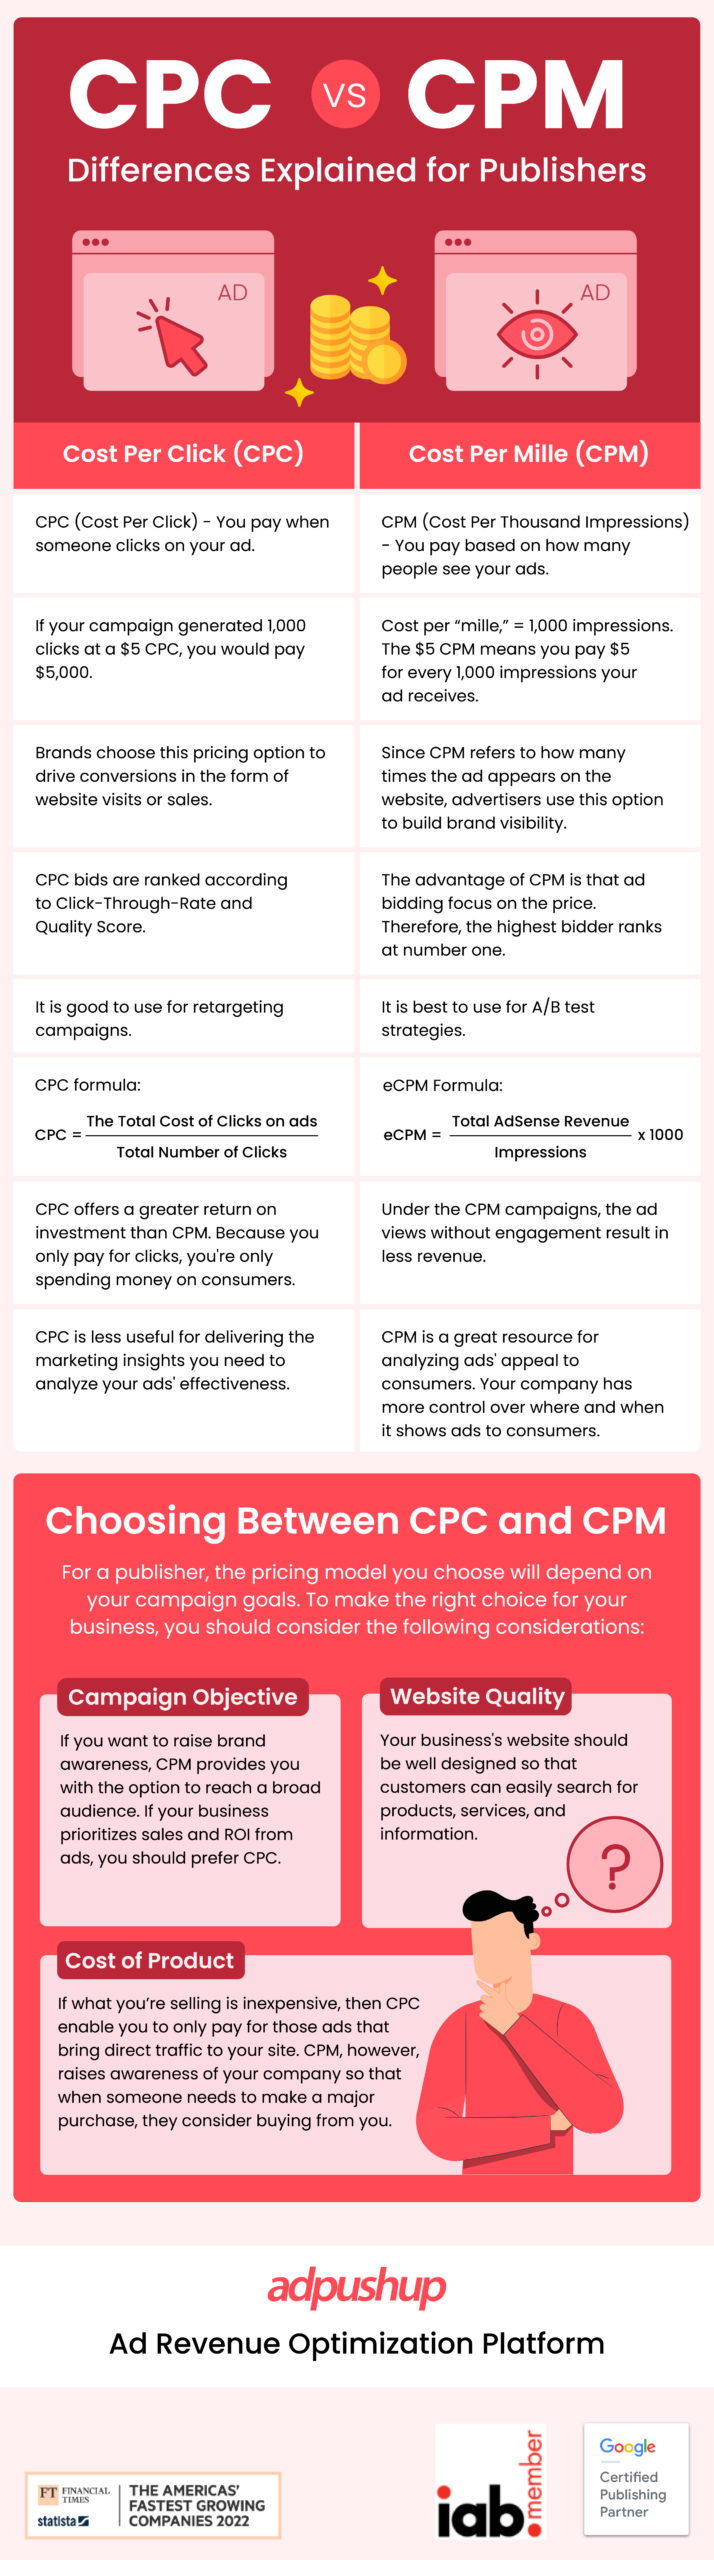 What is eCPM (effective cost per mile) and How to Improve It?